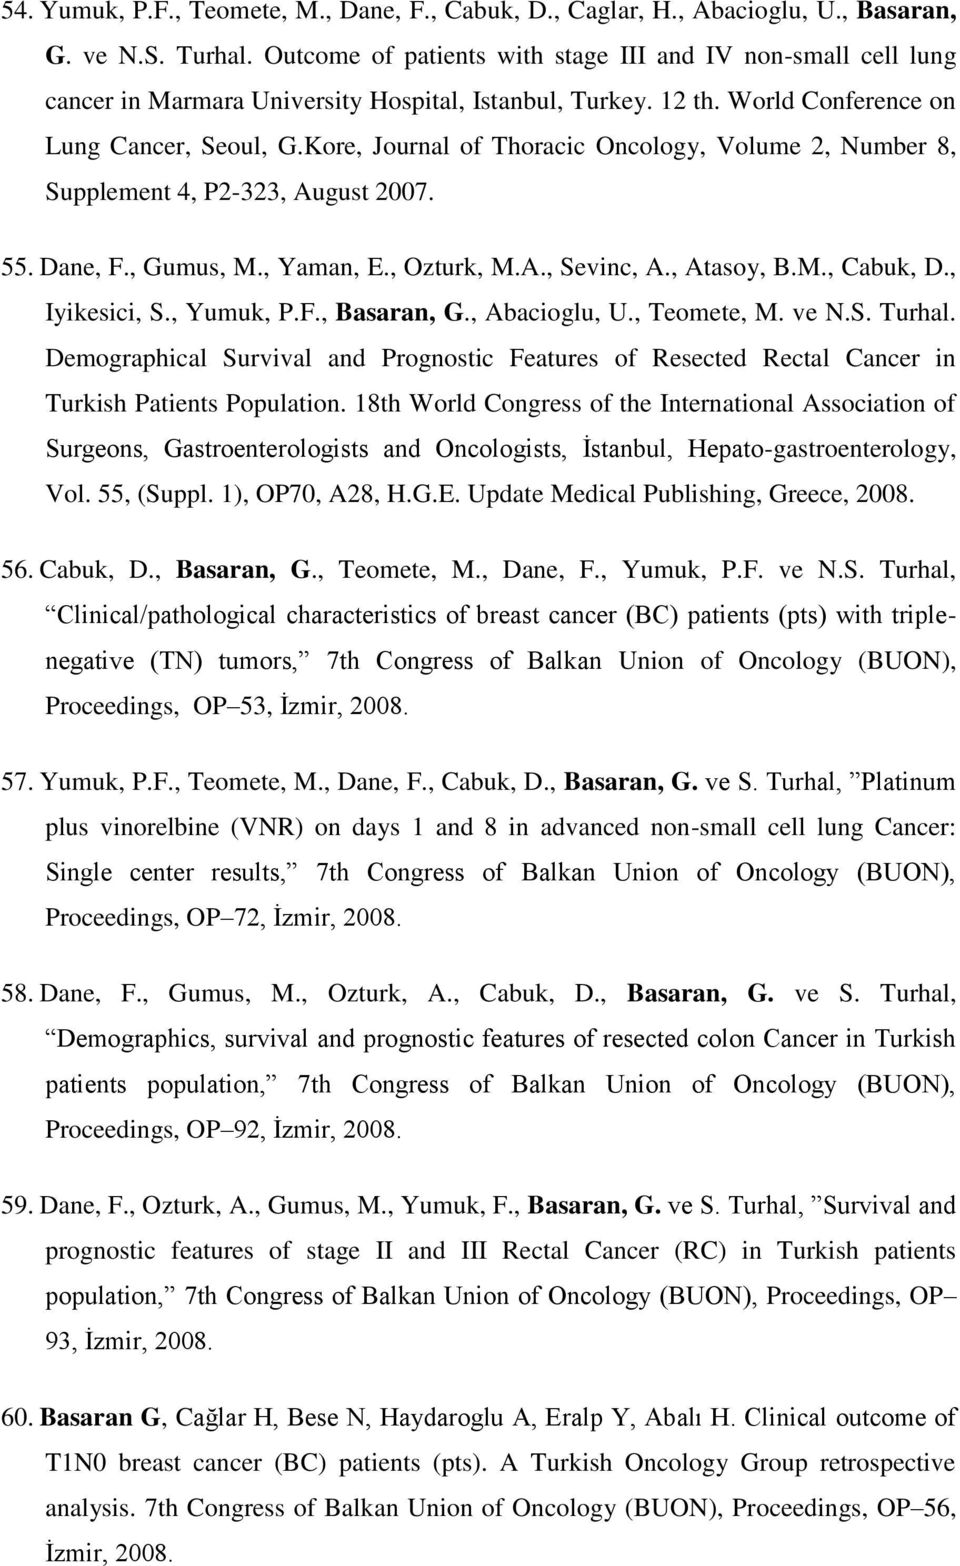 Kore, Journal of Thoracic Oncology, Volume 2, Number 8, Supplement 4, P2-323, August 2007. 55. Dane, F., Gumus, M., Yaman, E., Ozturk, M.A., Sevinc, A., Atasoy, B.M., Cabuk, D., Iyikesici, S.